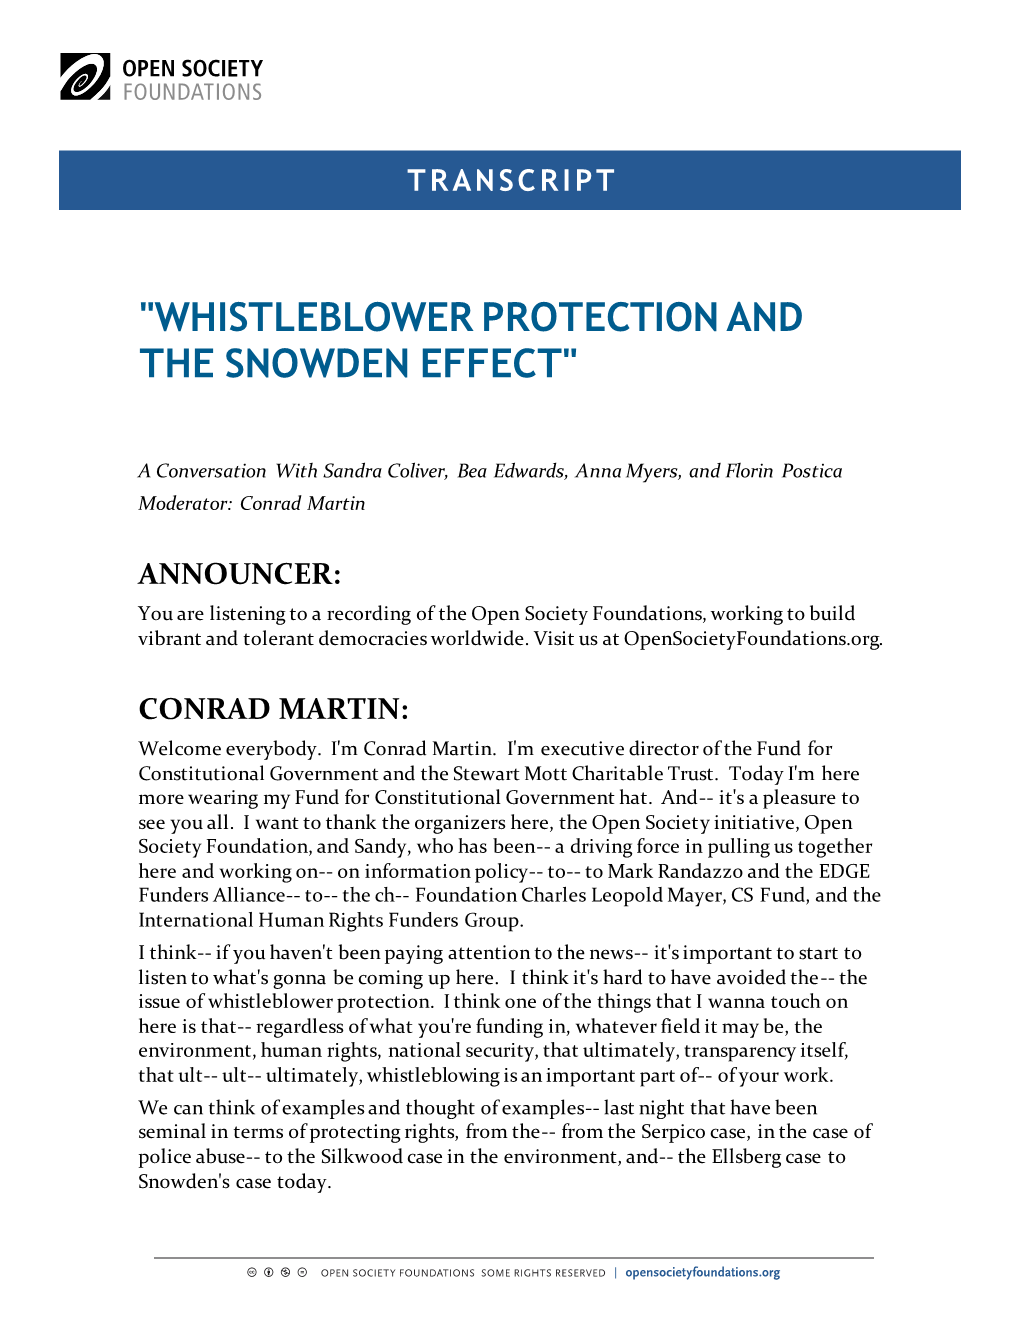 "Whistleblower Protection and the Snowden Effect"